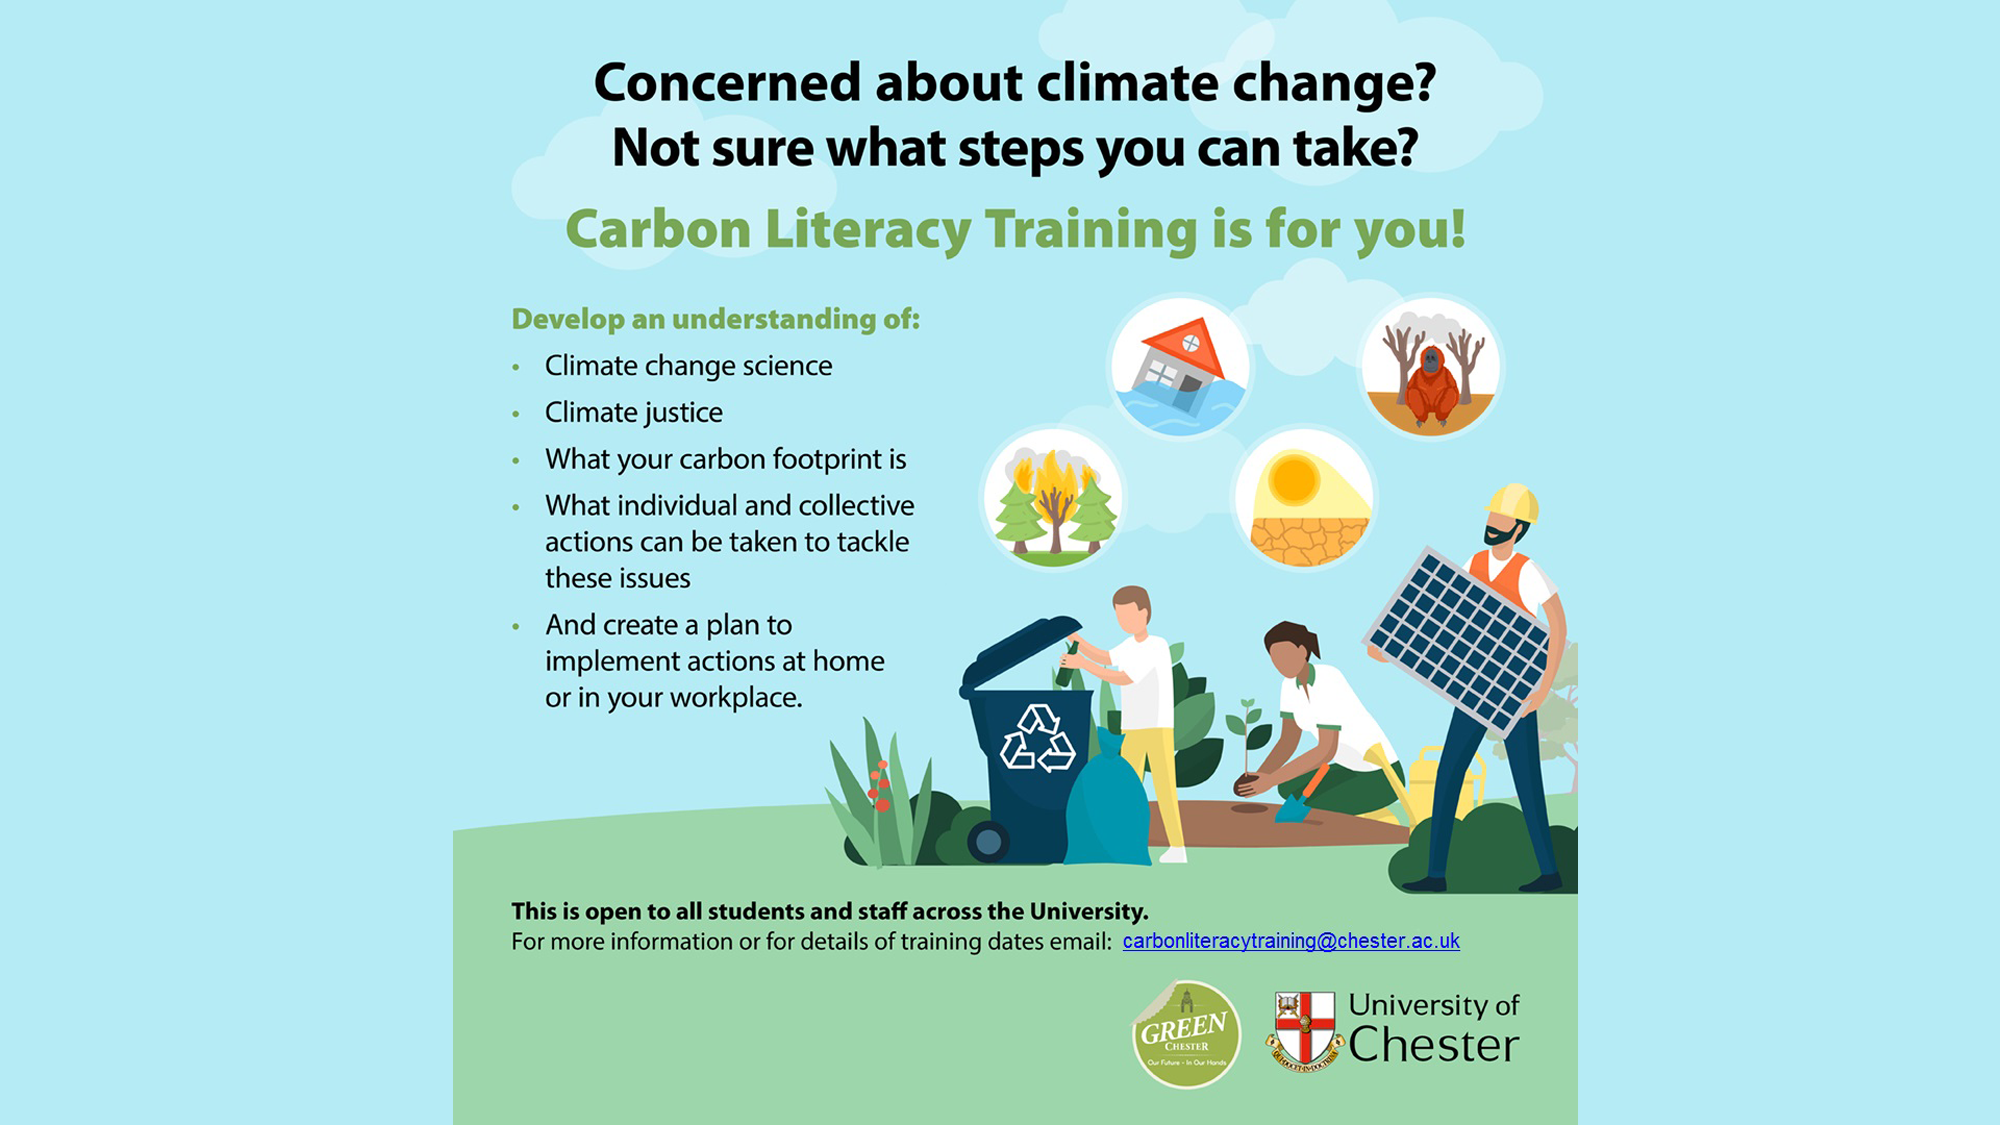 Carbon Literacy Training – Face to Face Sessions